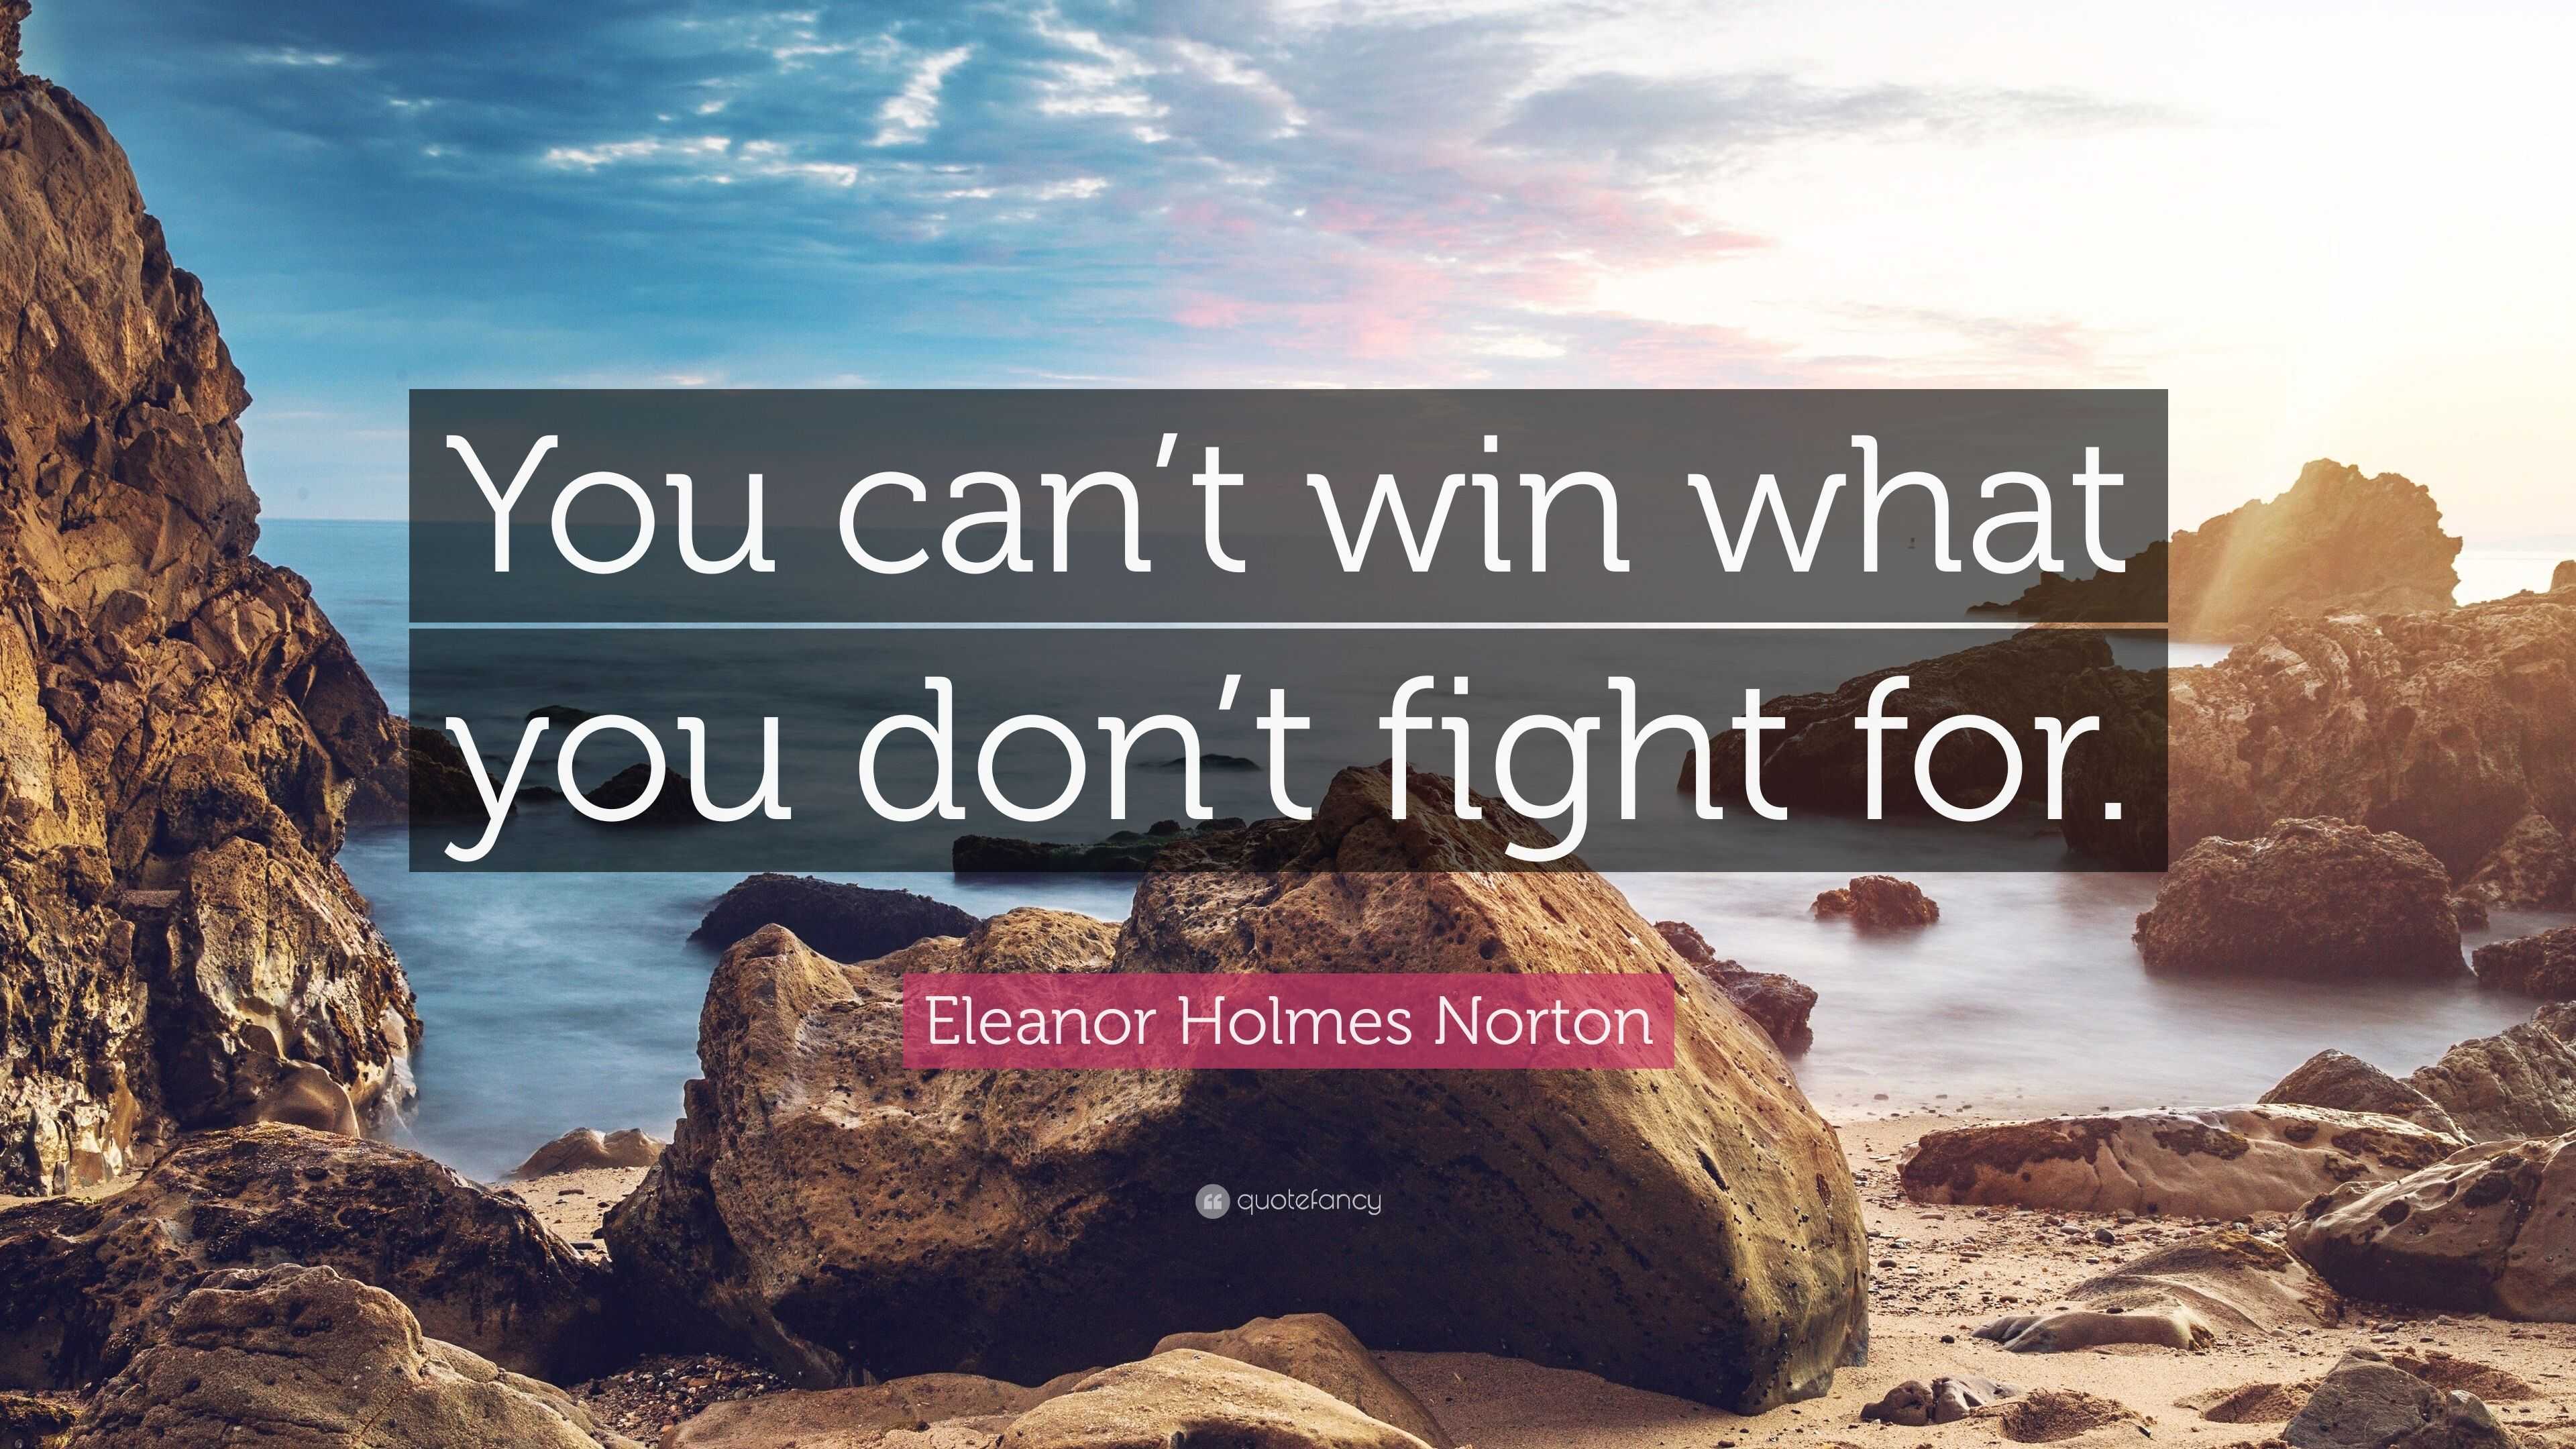 Eleanor Holmes Norton Quote: “You can’t win what you don’t fight for.”